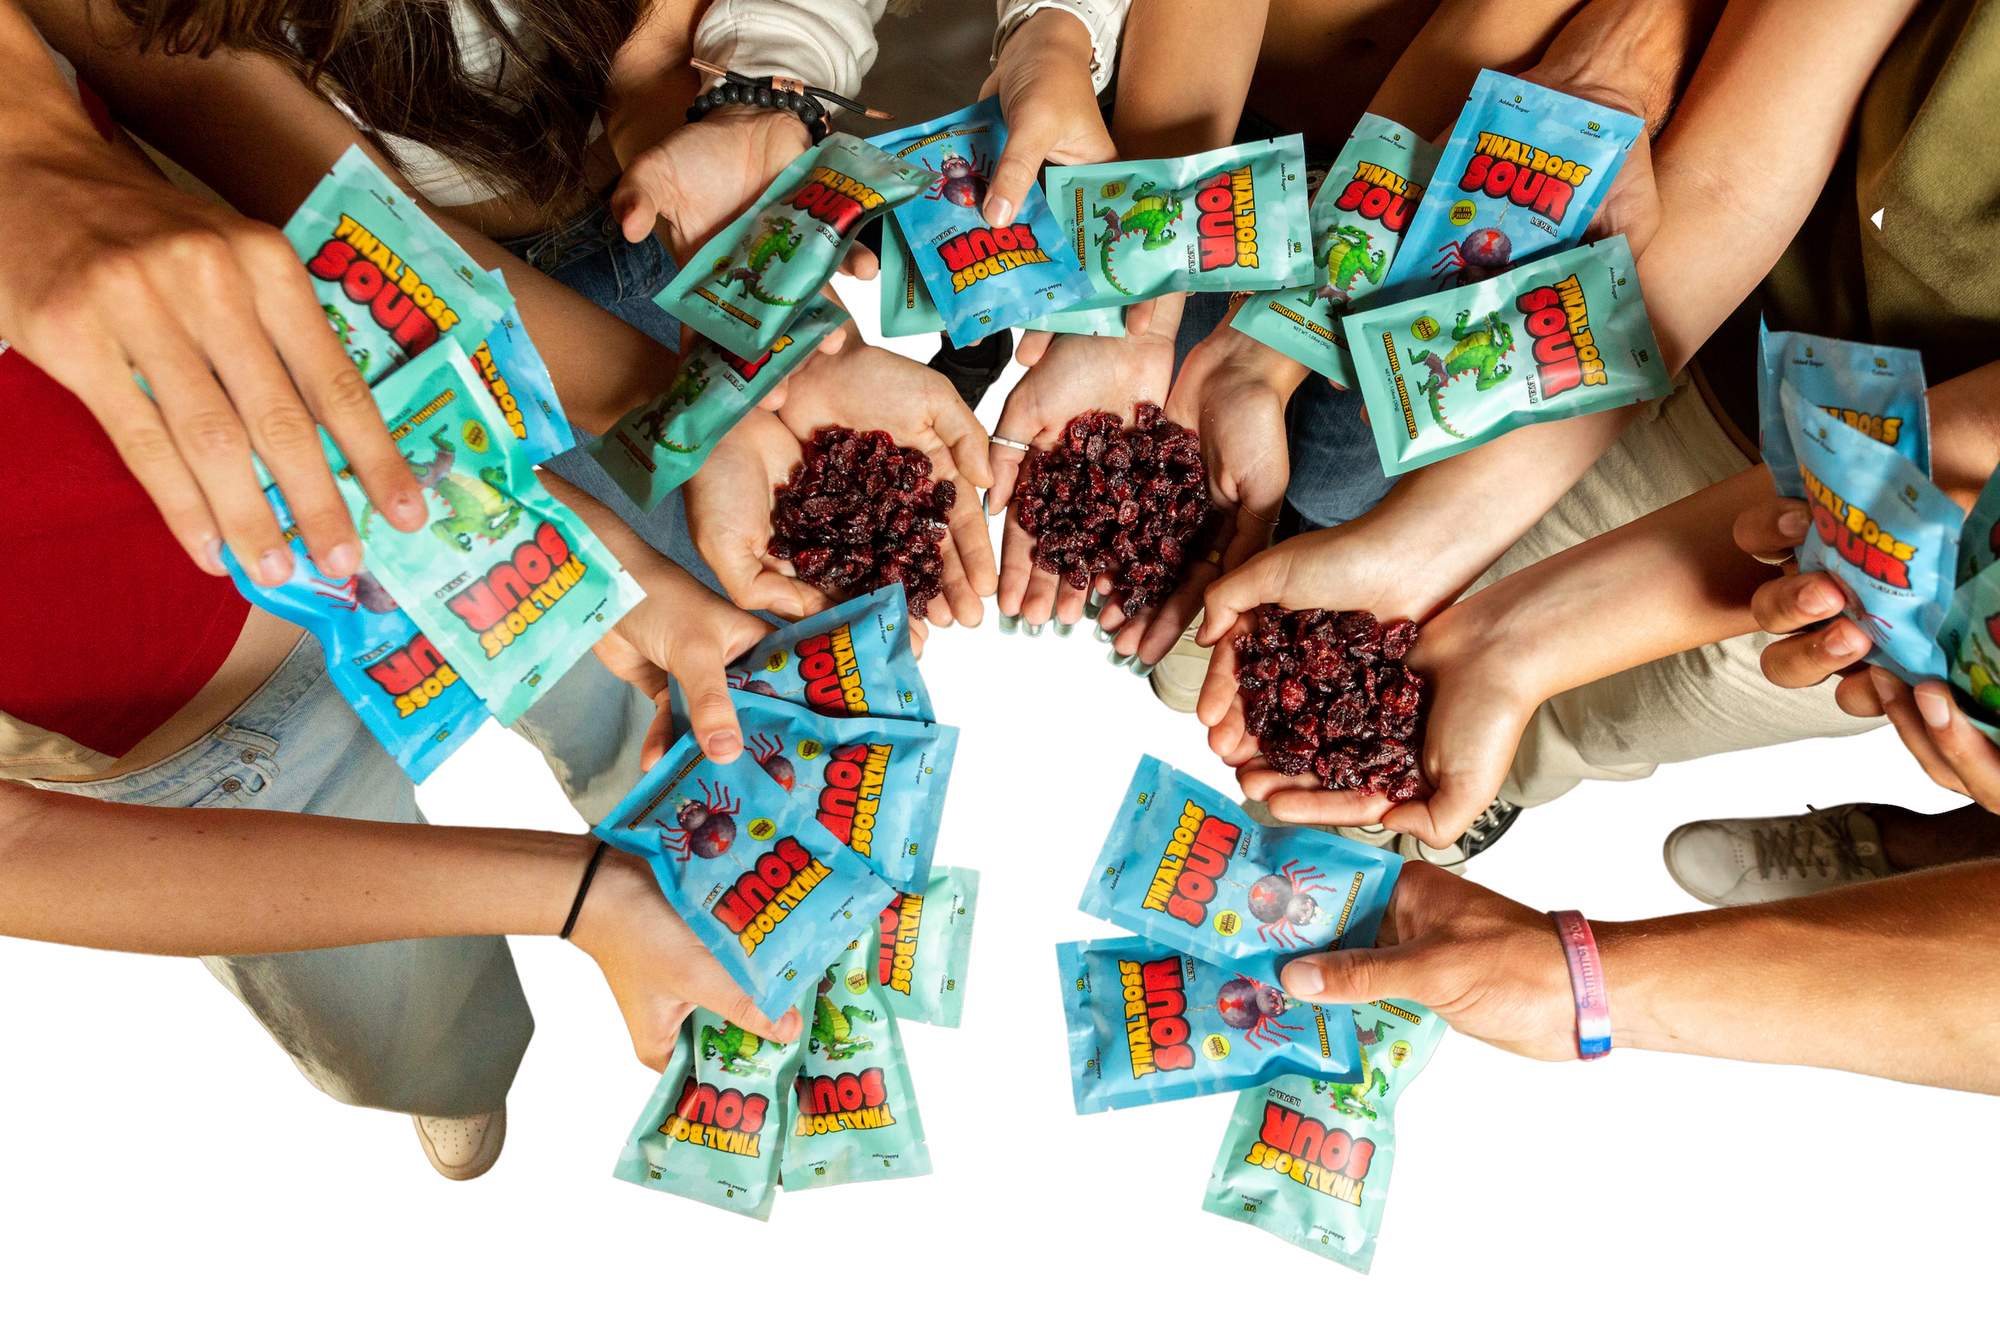 Birds eye view shot of a group of hands holding lots of Final Boss Sour cranberries.